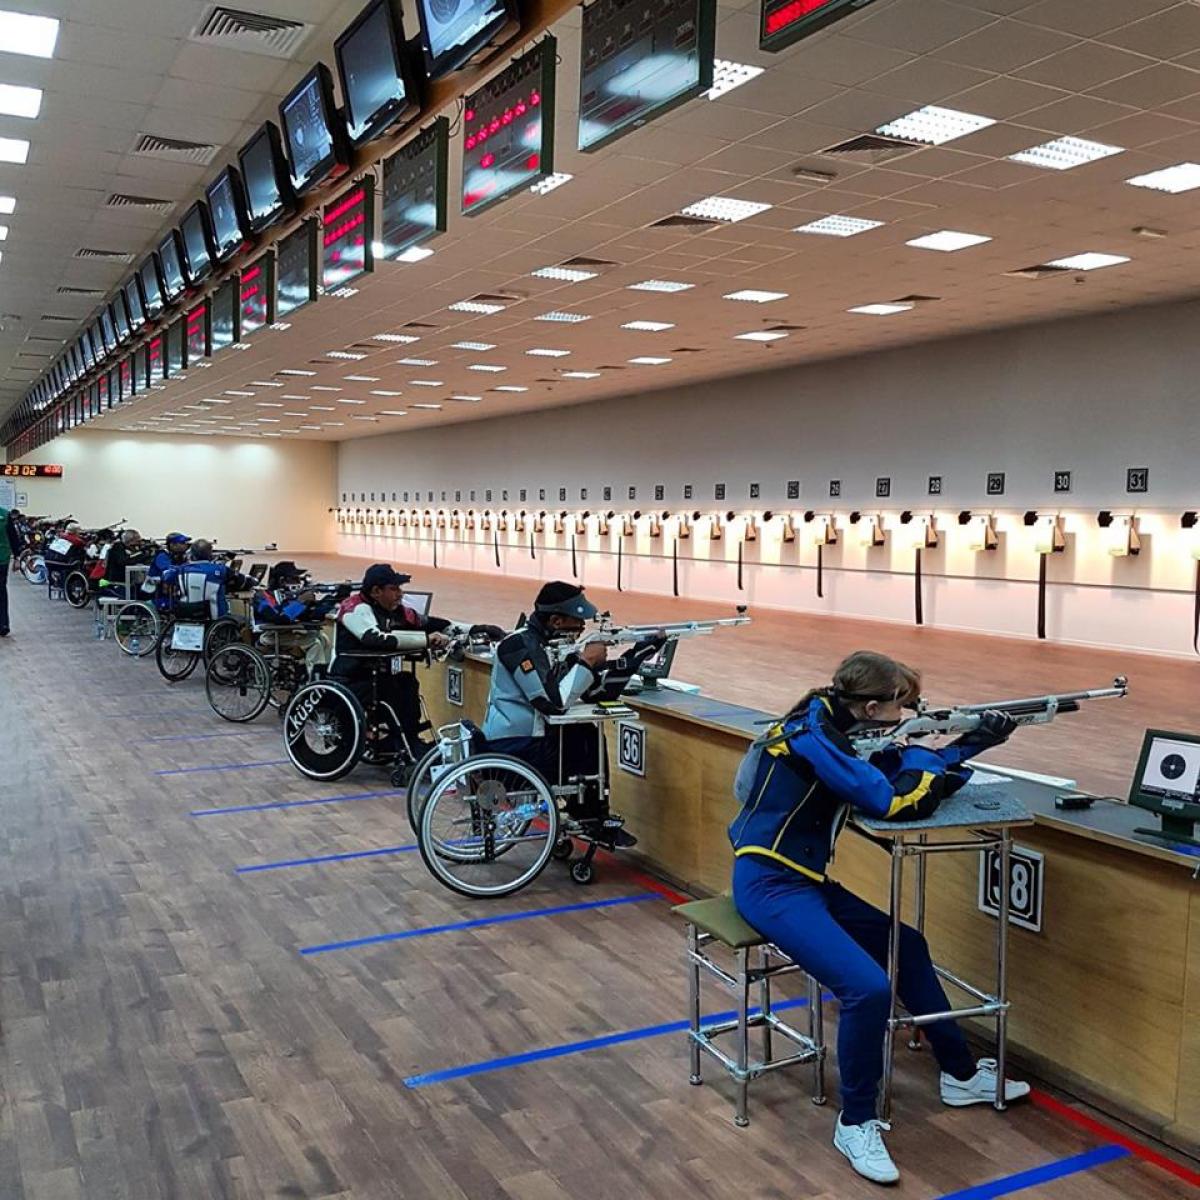 A series of Para sport shooters take aim on the shooting range